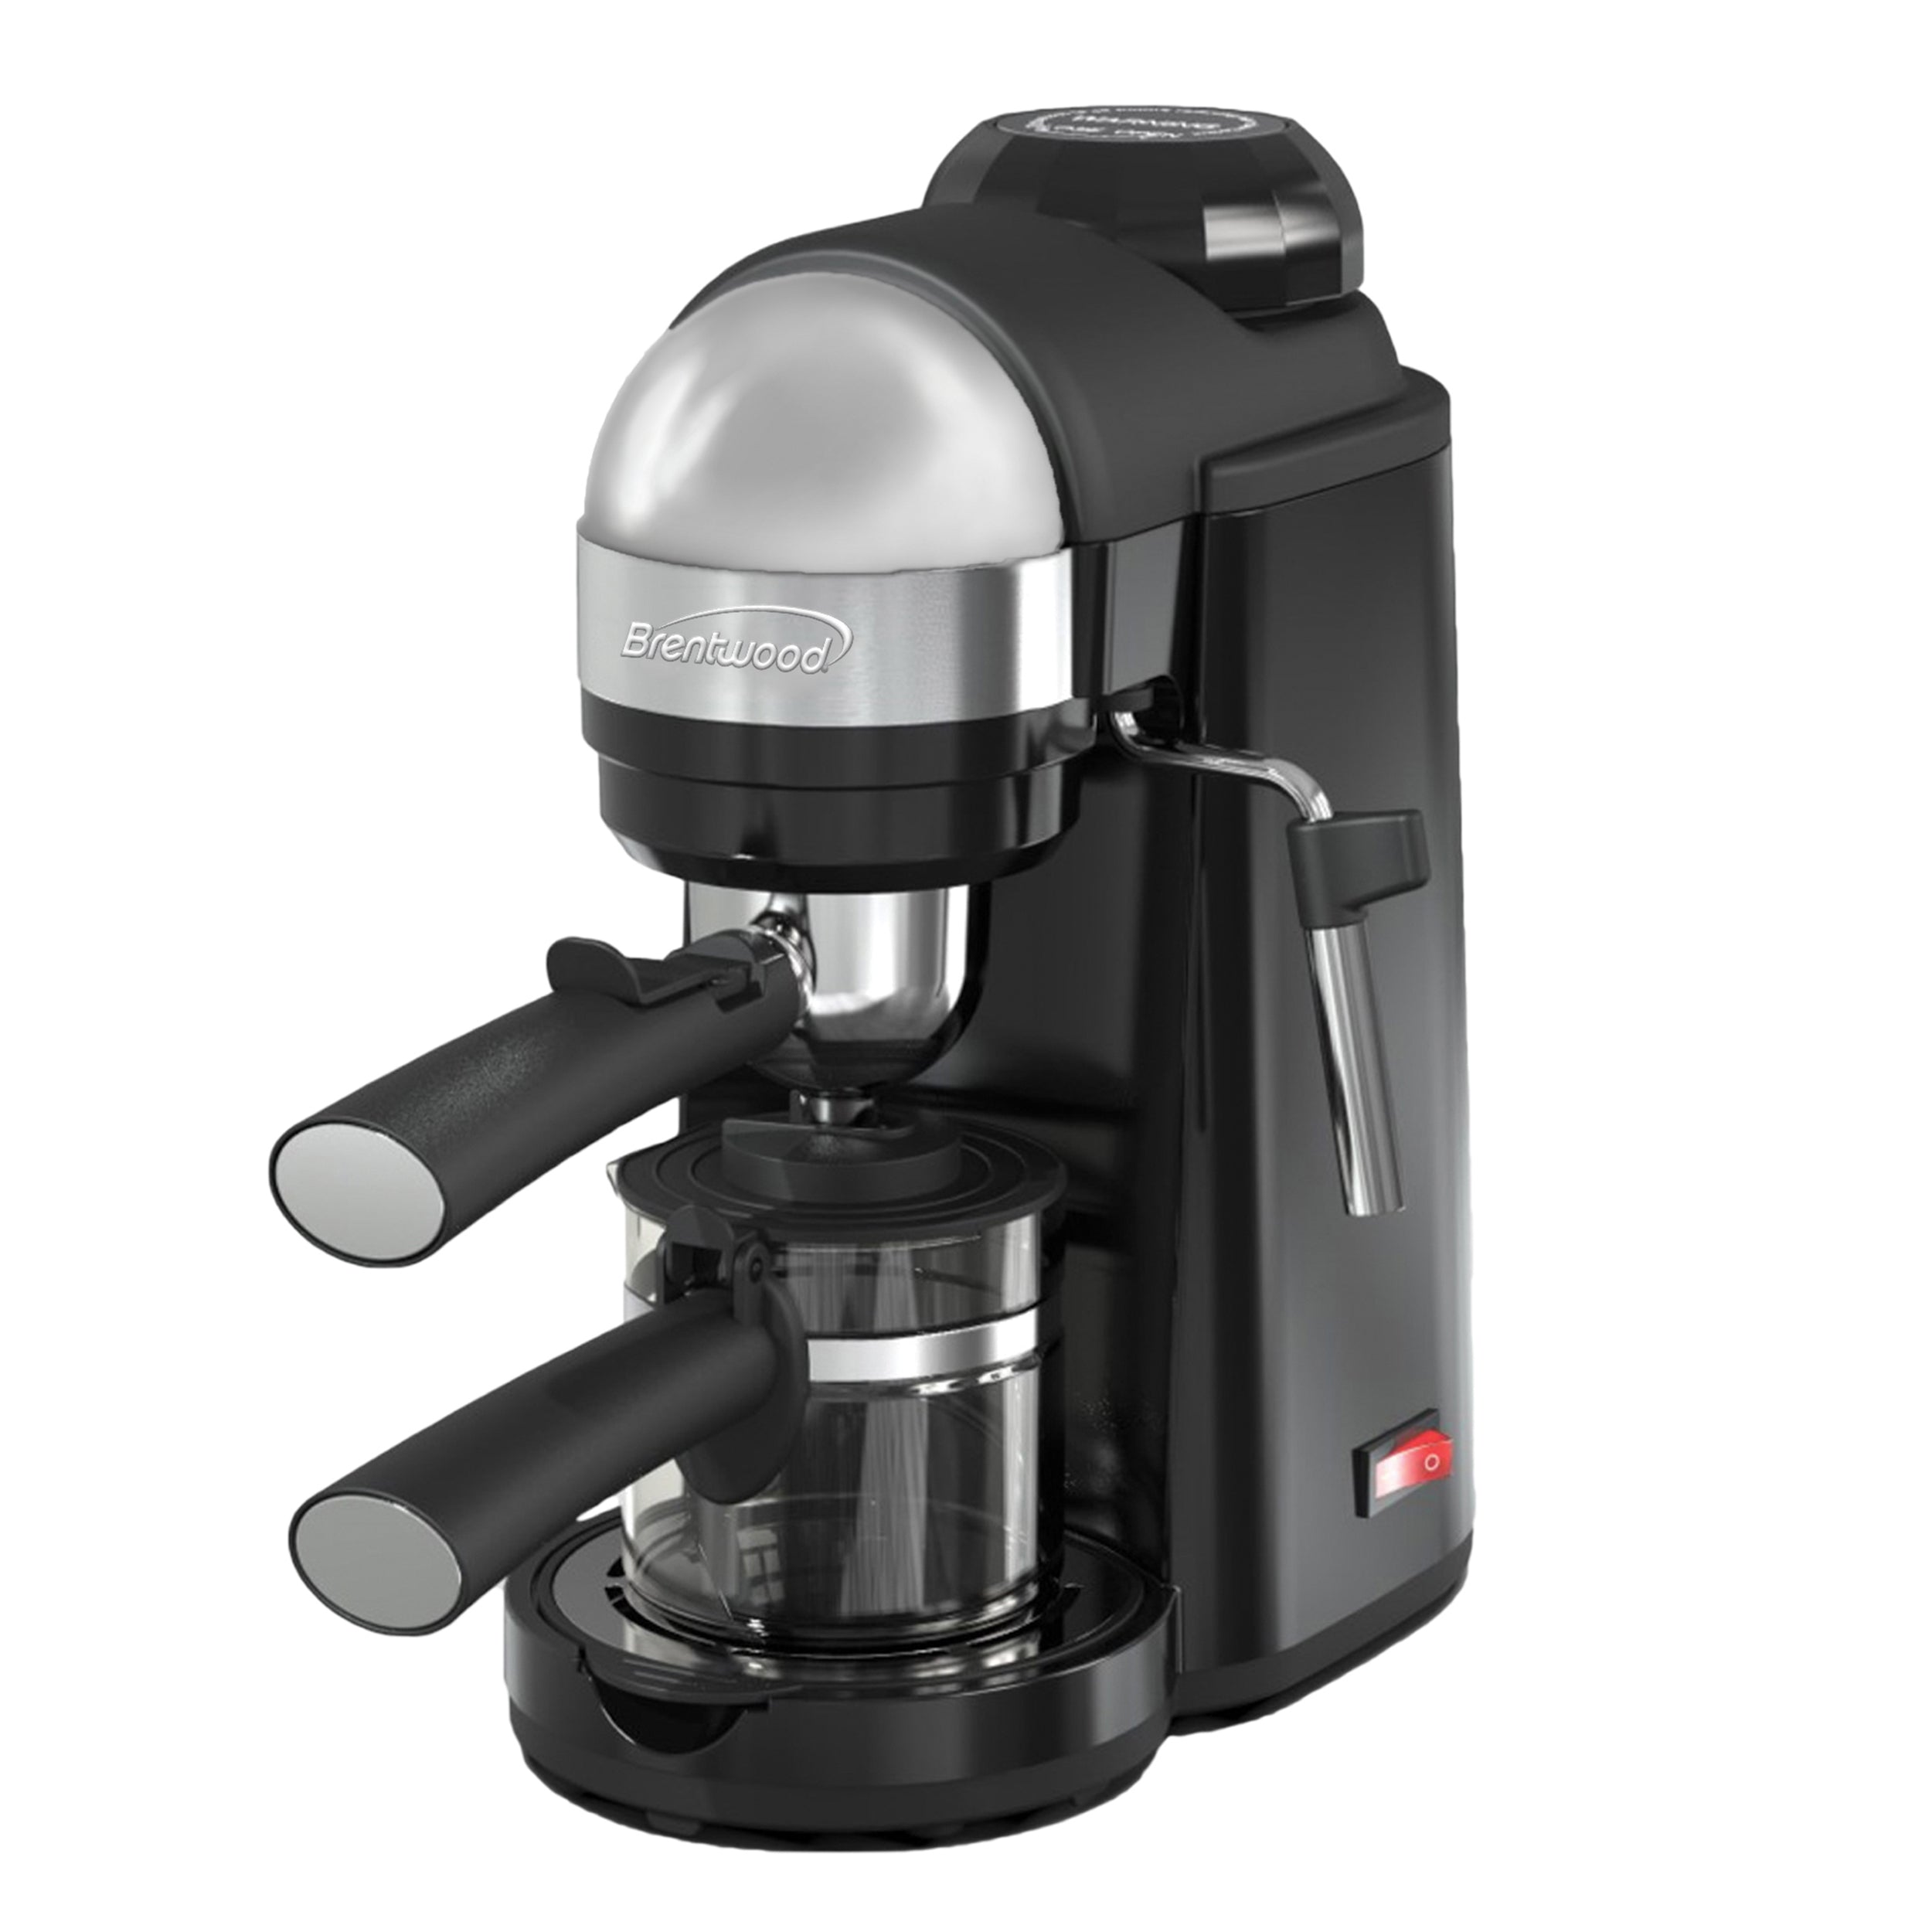 Brentwood Brentwood GA-135BK Espresso and Cappuccino Maker in Black